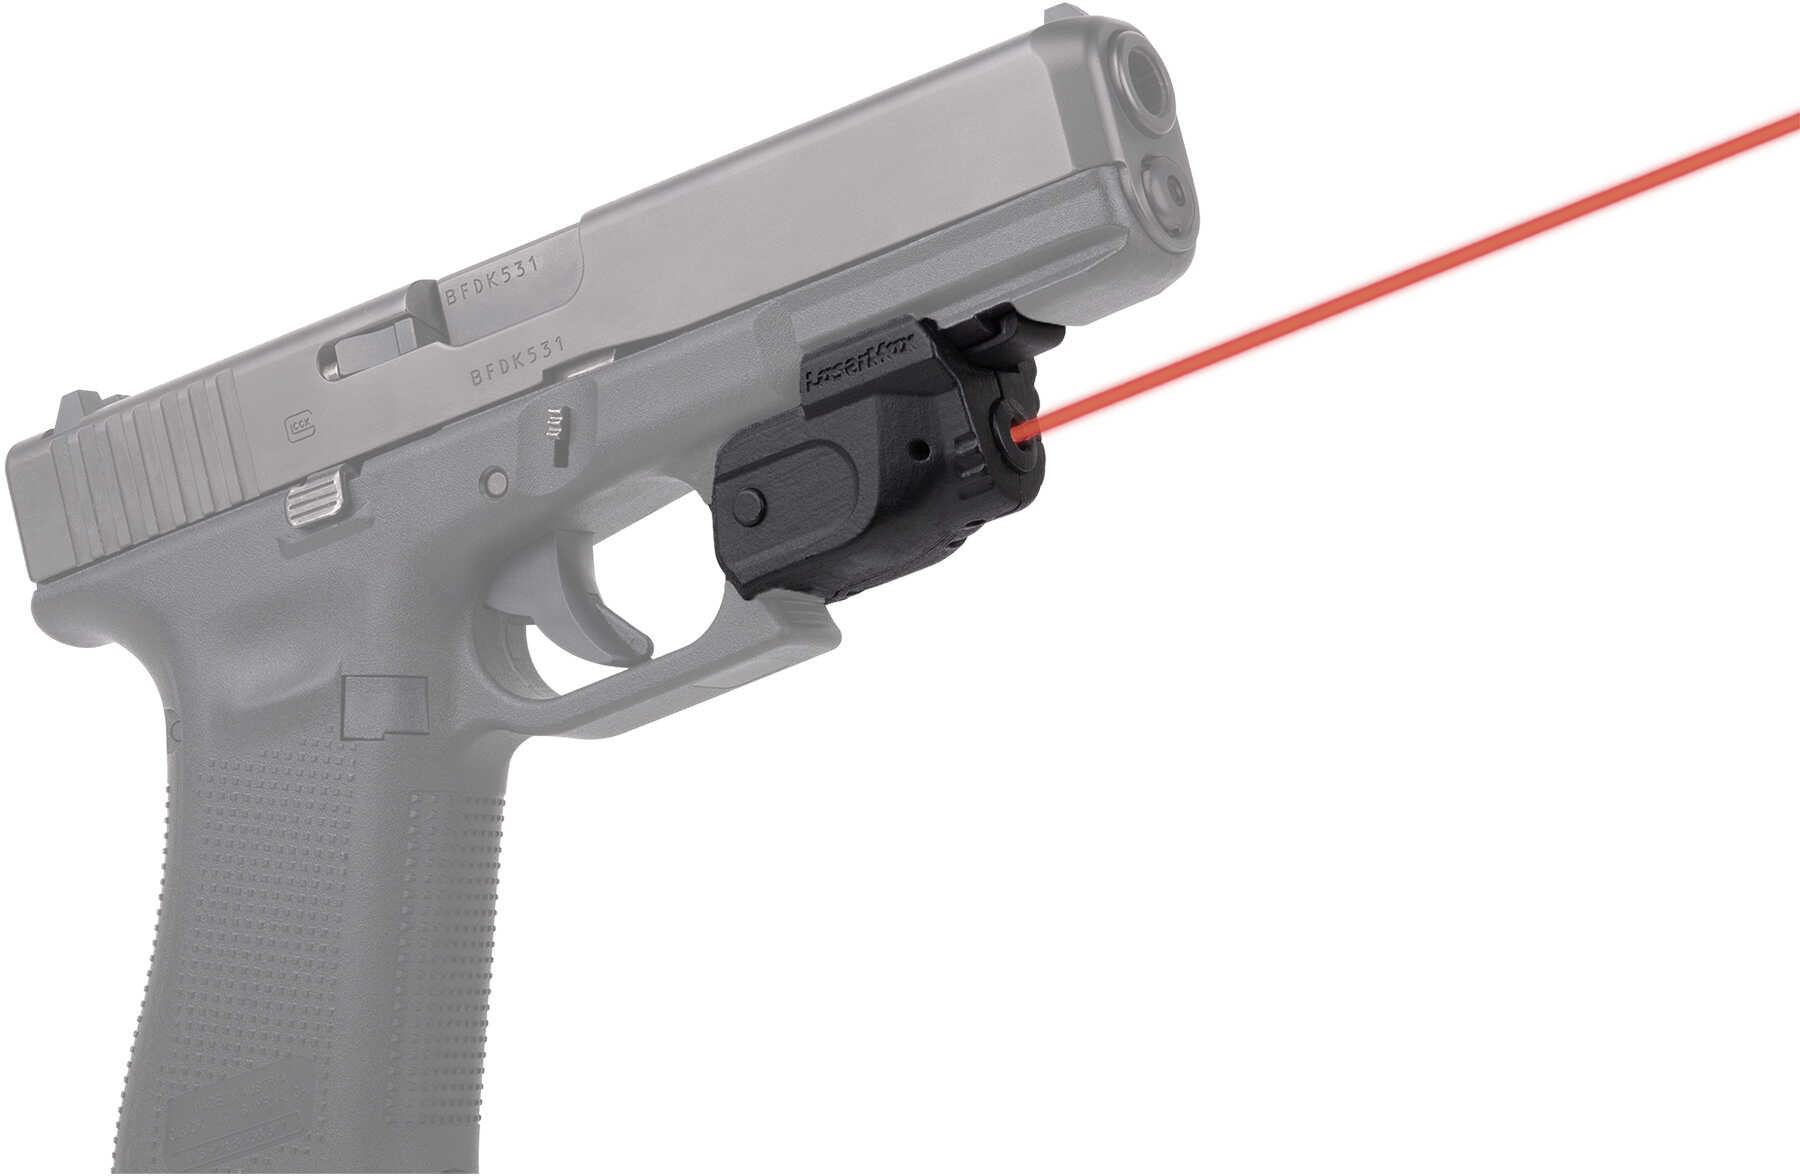 LaserMax Lightning Rail Mounted GripSense Technology Fits Firearm with at Least 1" Black Finish Red